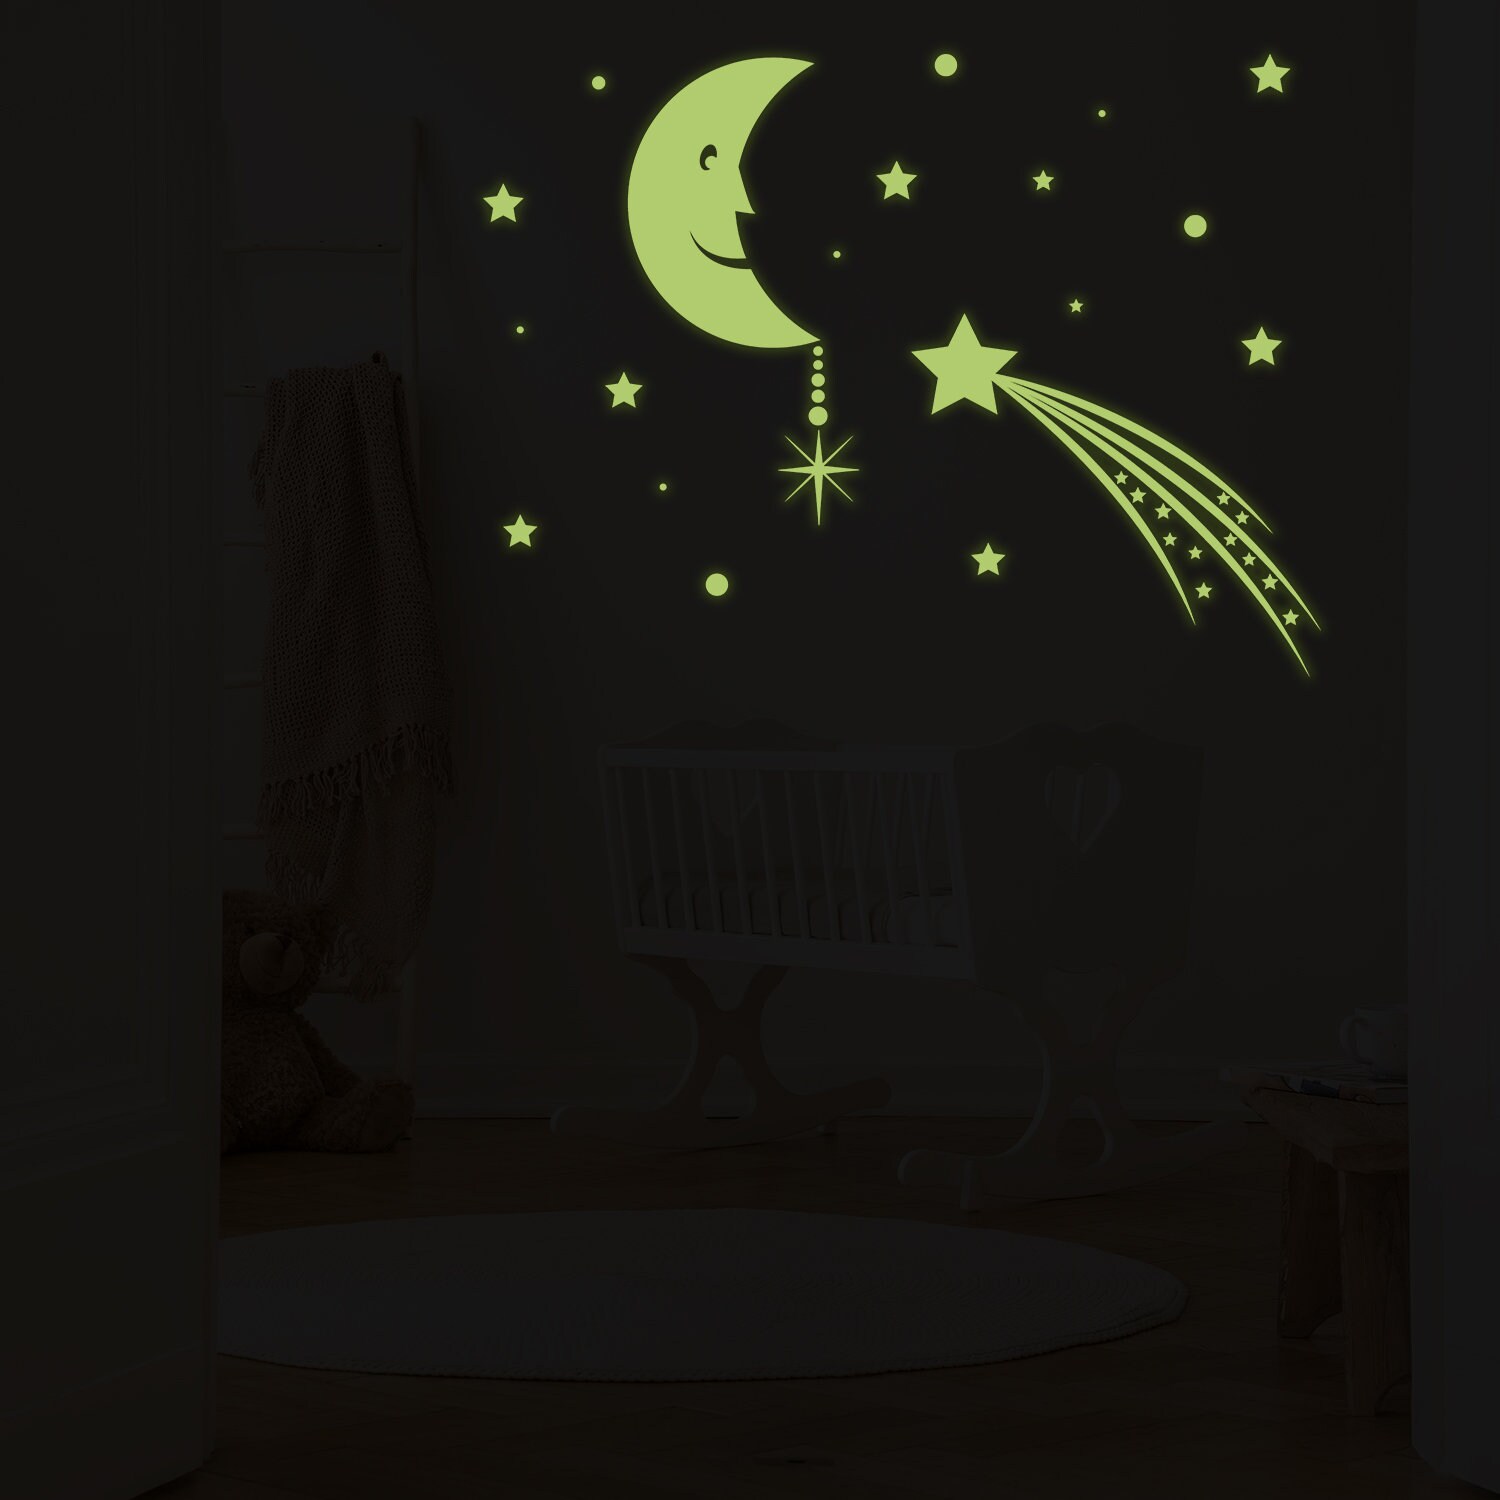 Glowing Moon with Stars Sky Sticker Glow in the Dark Falling Star Decor Decals C